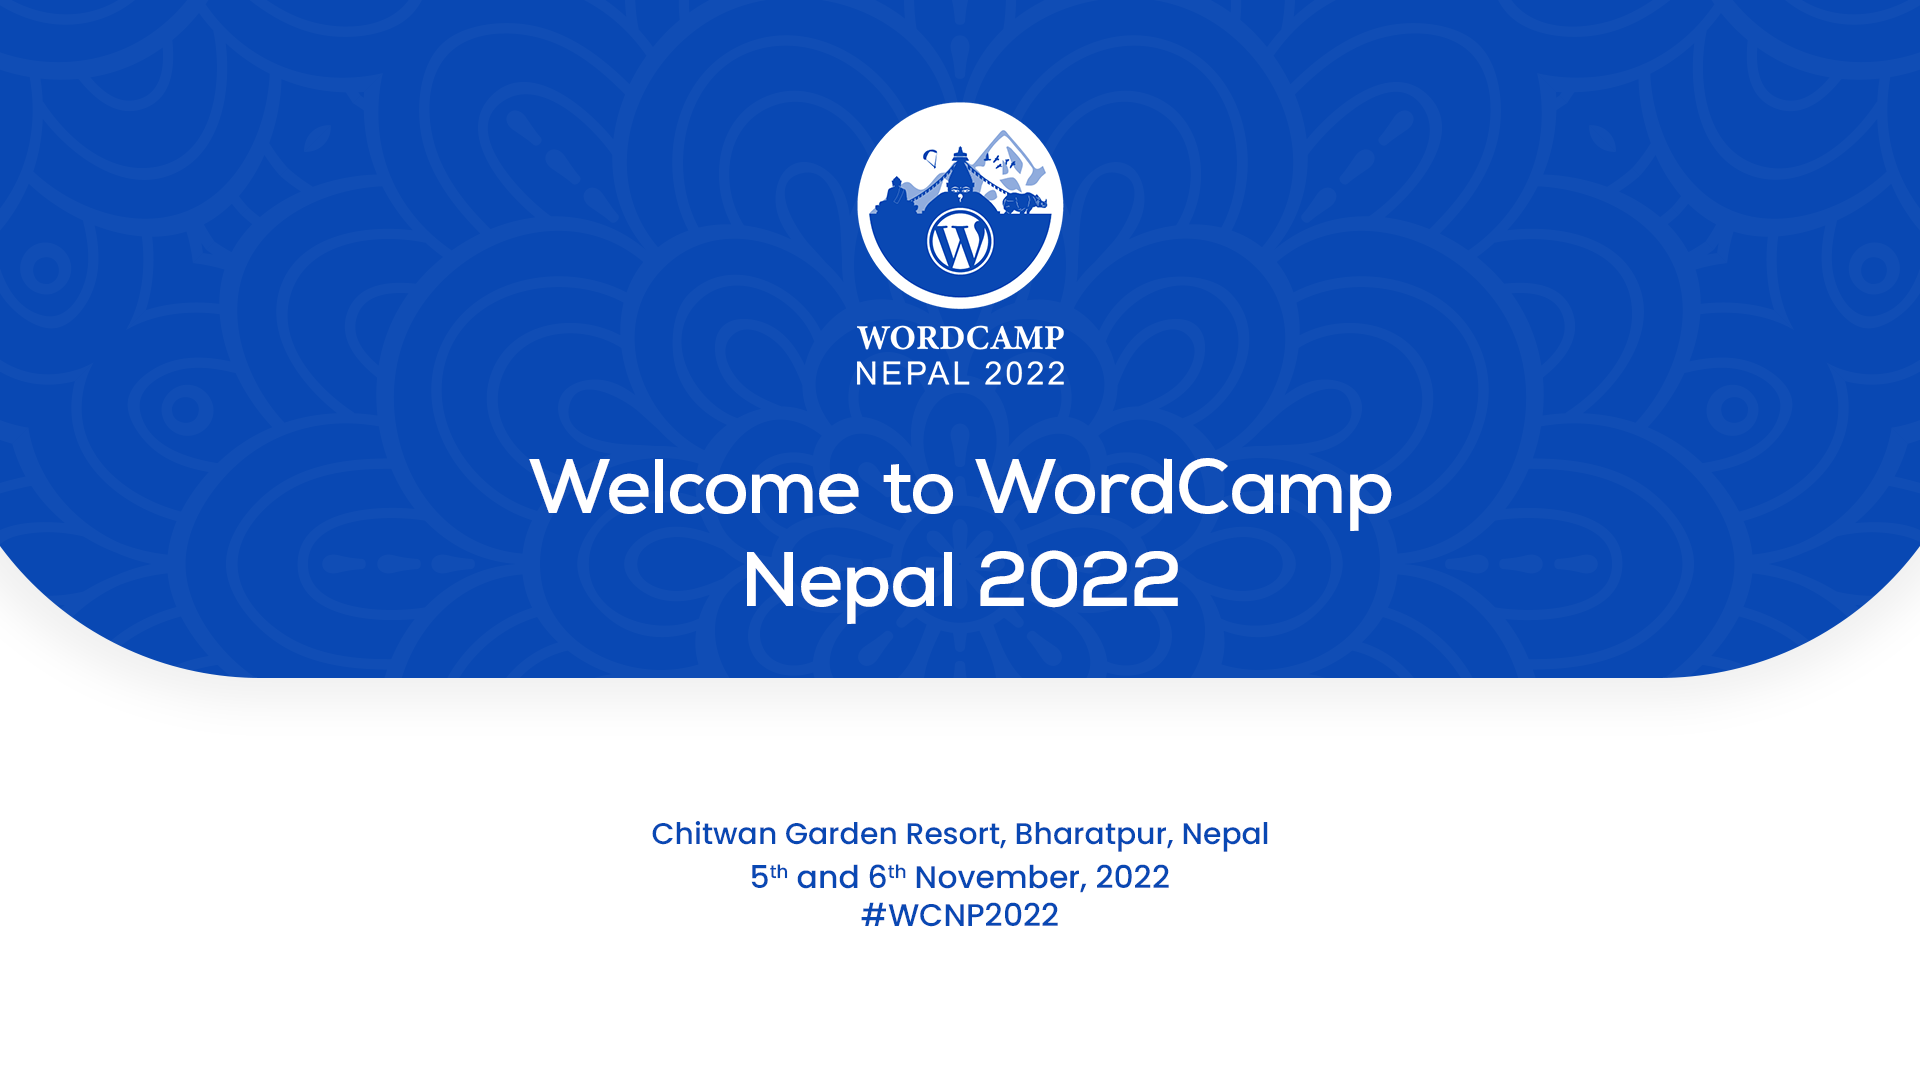 Welcome to WordCamp Nepal